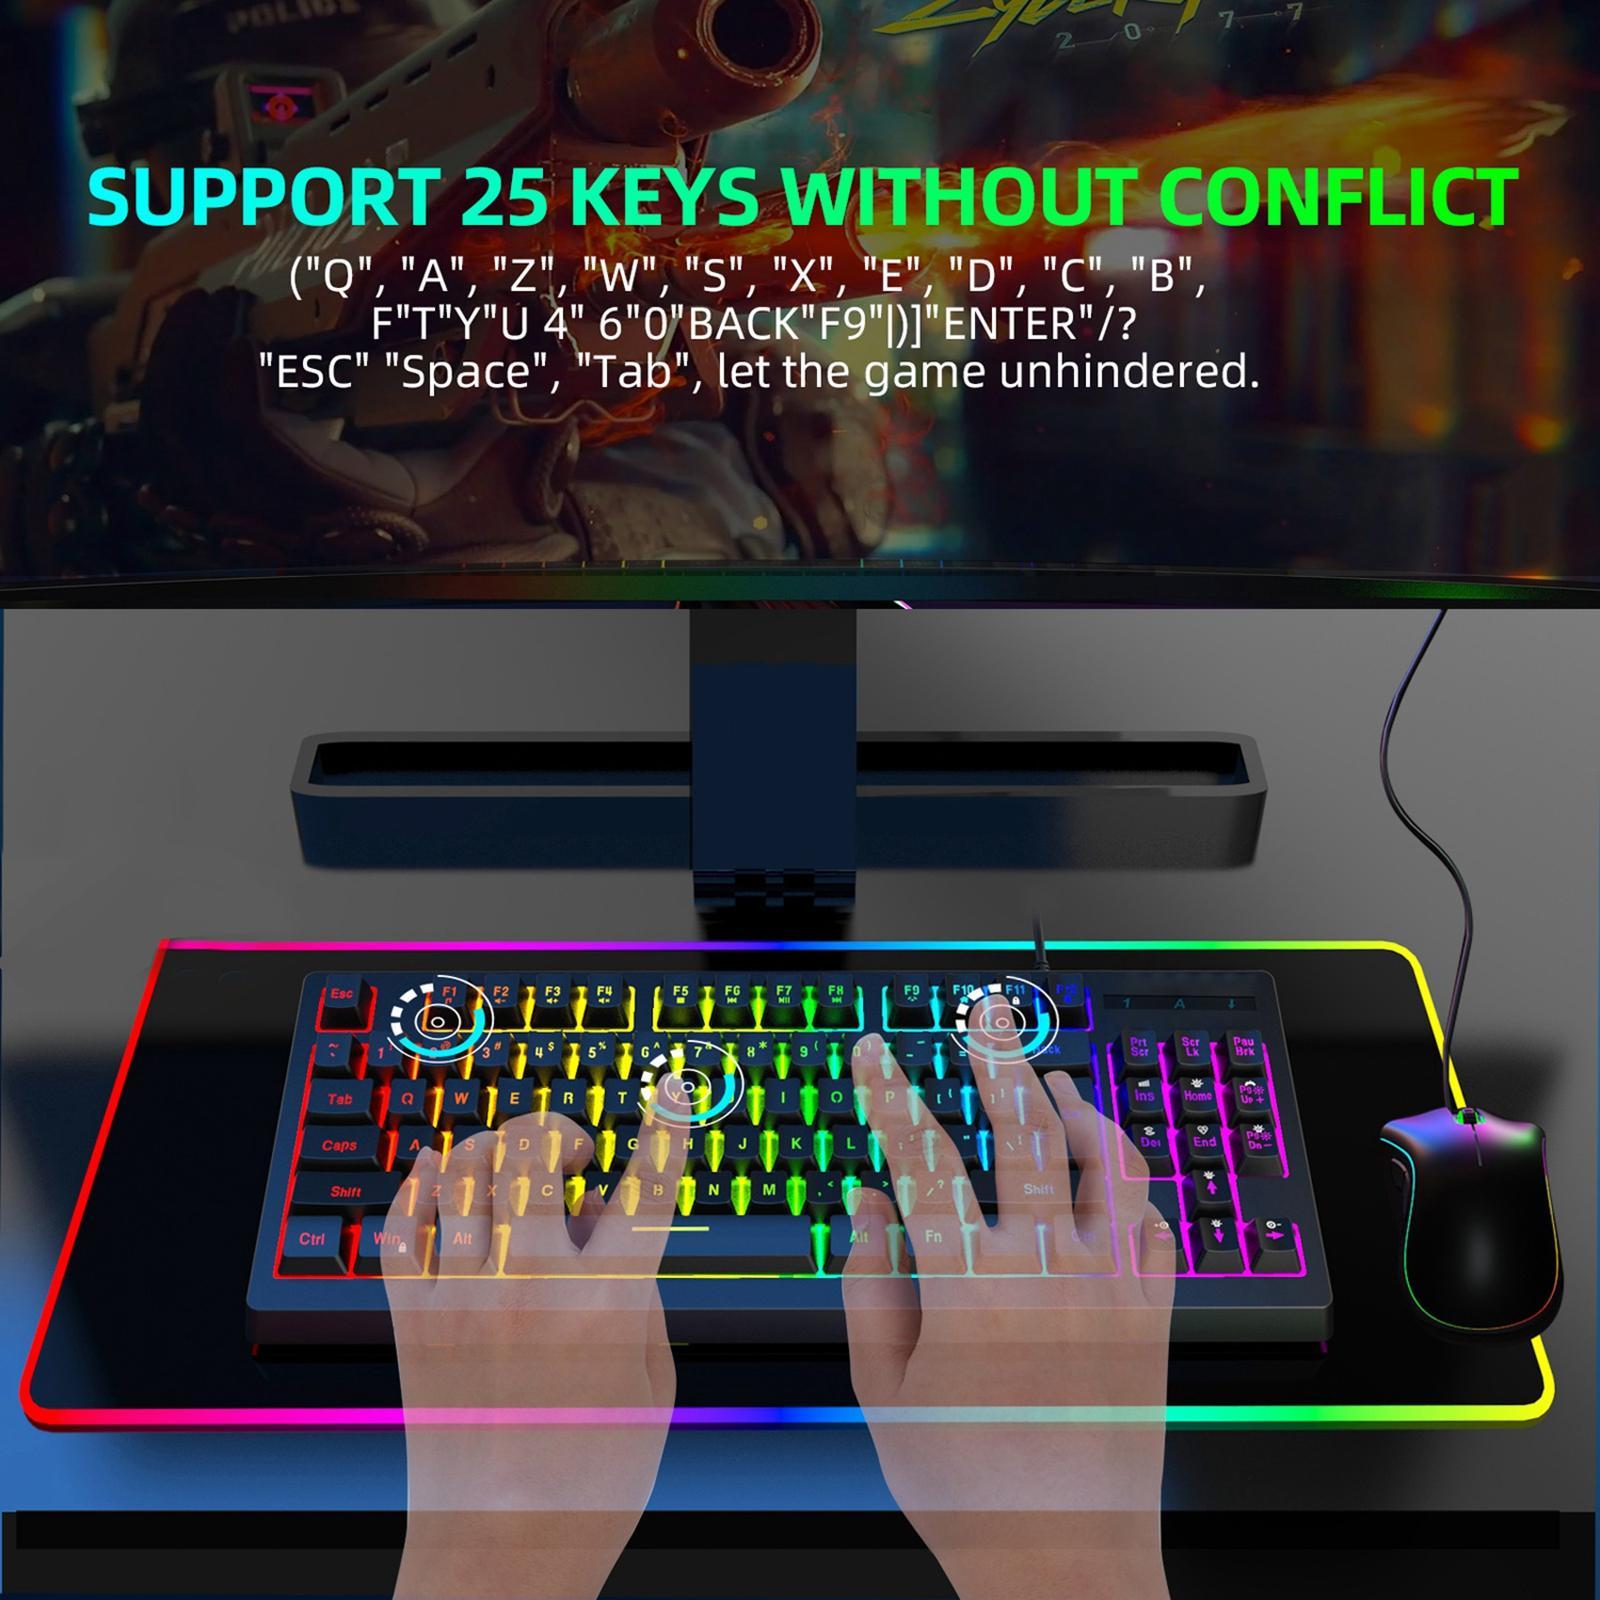 87Keys Wired Mechanical Gaming Keyboard, Light Touch Feeling USB Charging Compact Built in Battery Office Keyboard for Learning PC Women Men